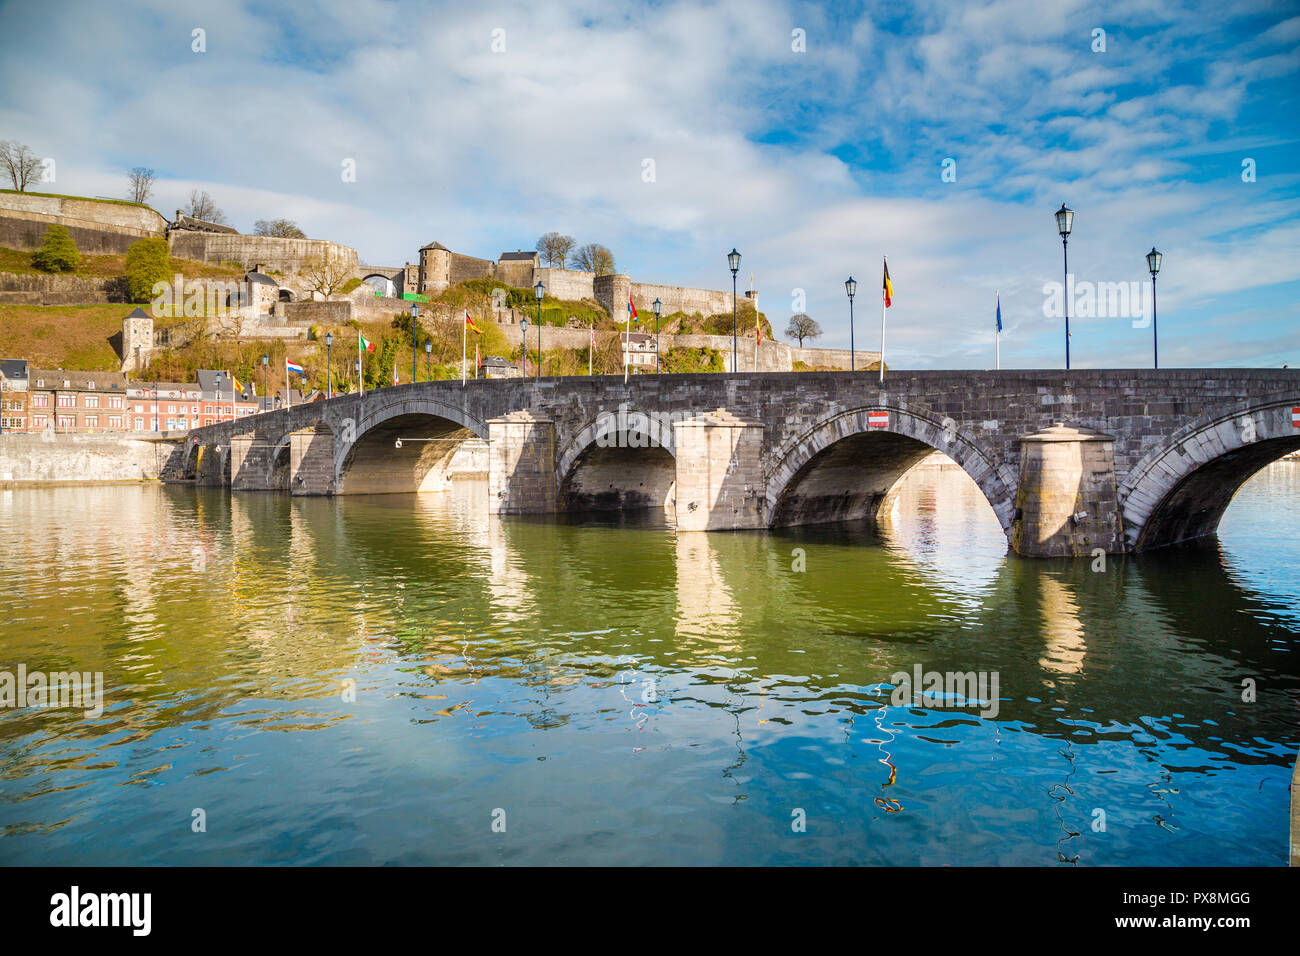 Classic view of the historic town of Namur with famous Old Bridge crossing scenic River Meuse in summer, province of Namur, Wallonia, Belgium Stock Photo